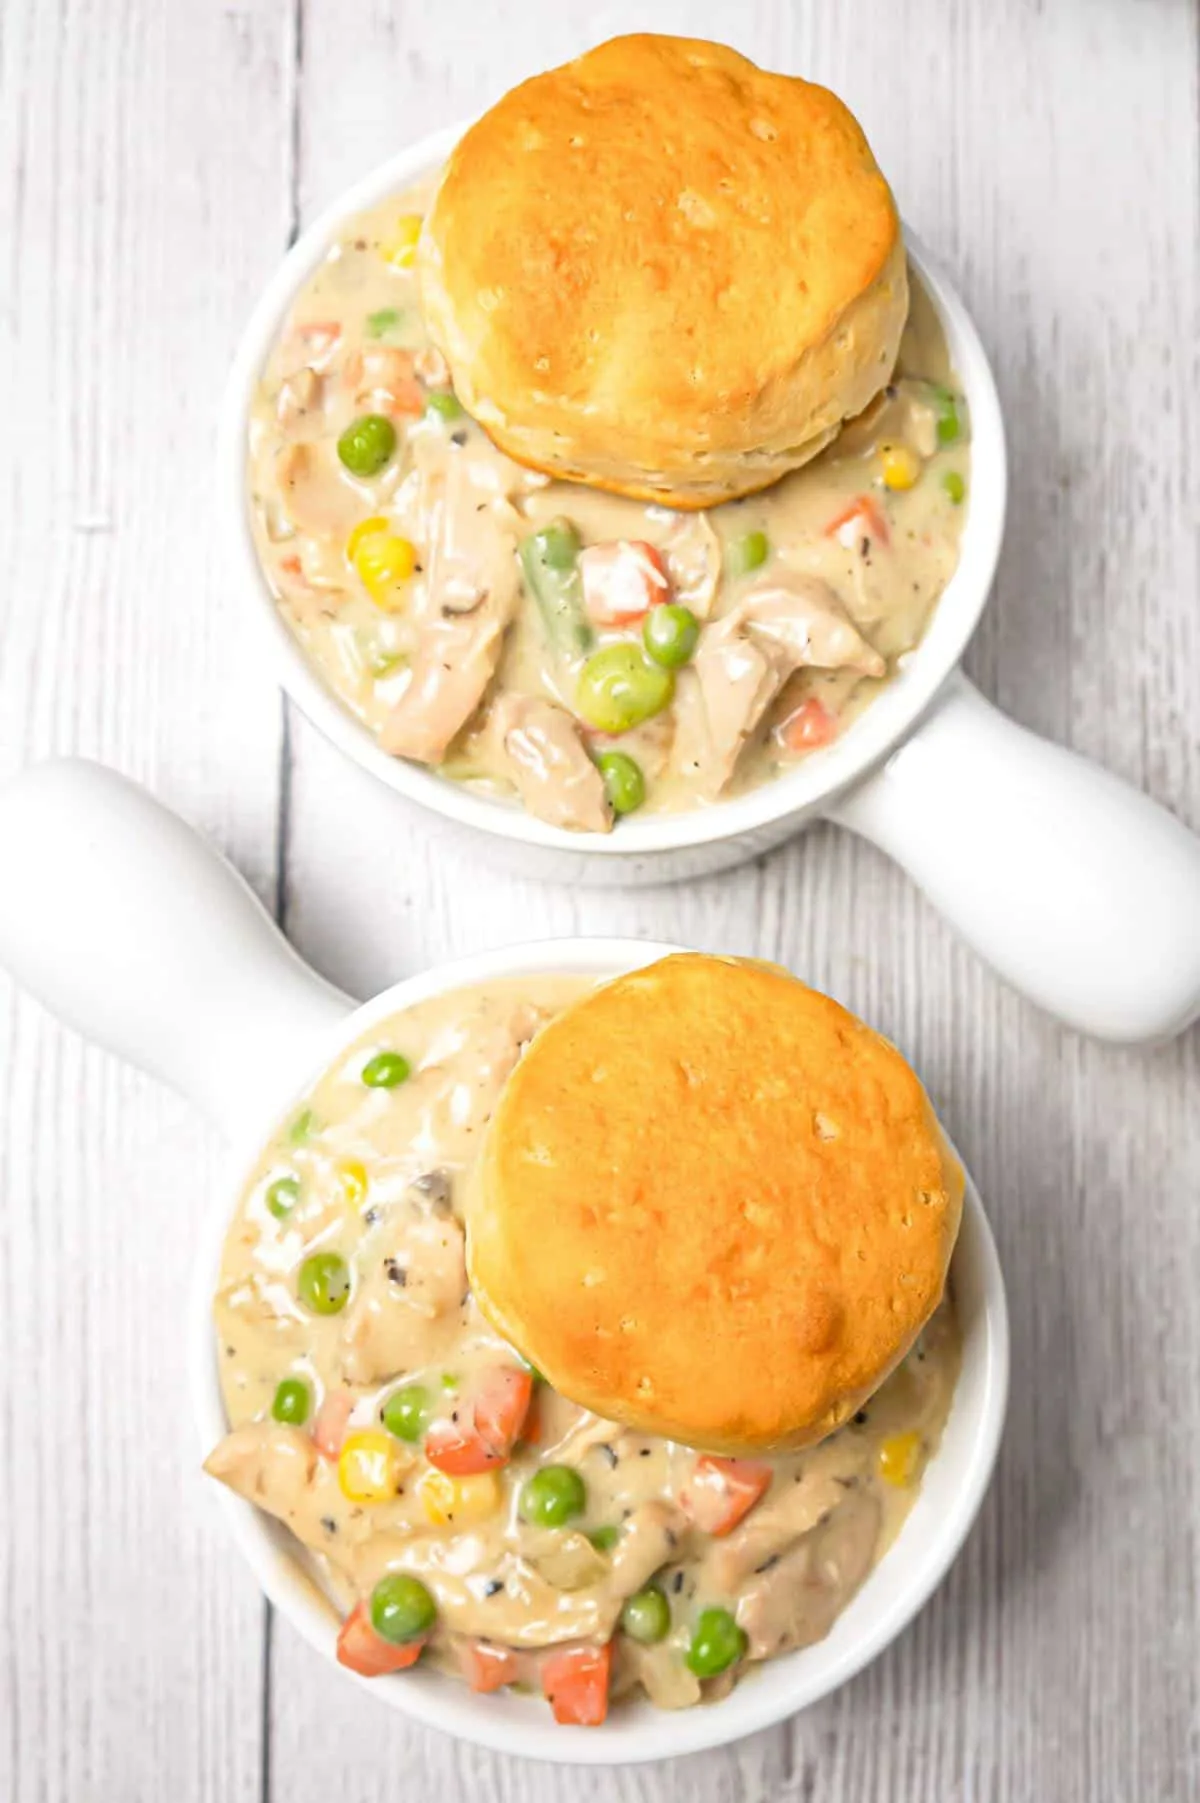 Crock Pot Chicken Pot Pie is an easy slow cooker dinner recipe made with boneless, skinless chicken thighs, cream of mushroom soup, cream of chicken soup and mixed veggies and topped with Pillsbury biscuits.